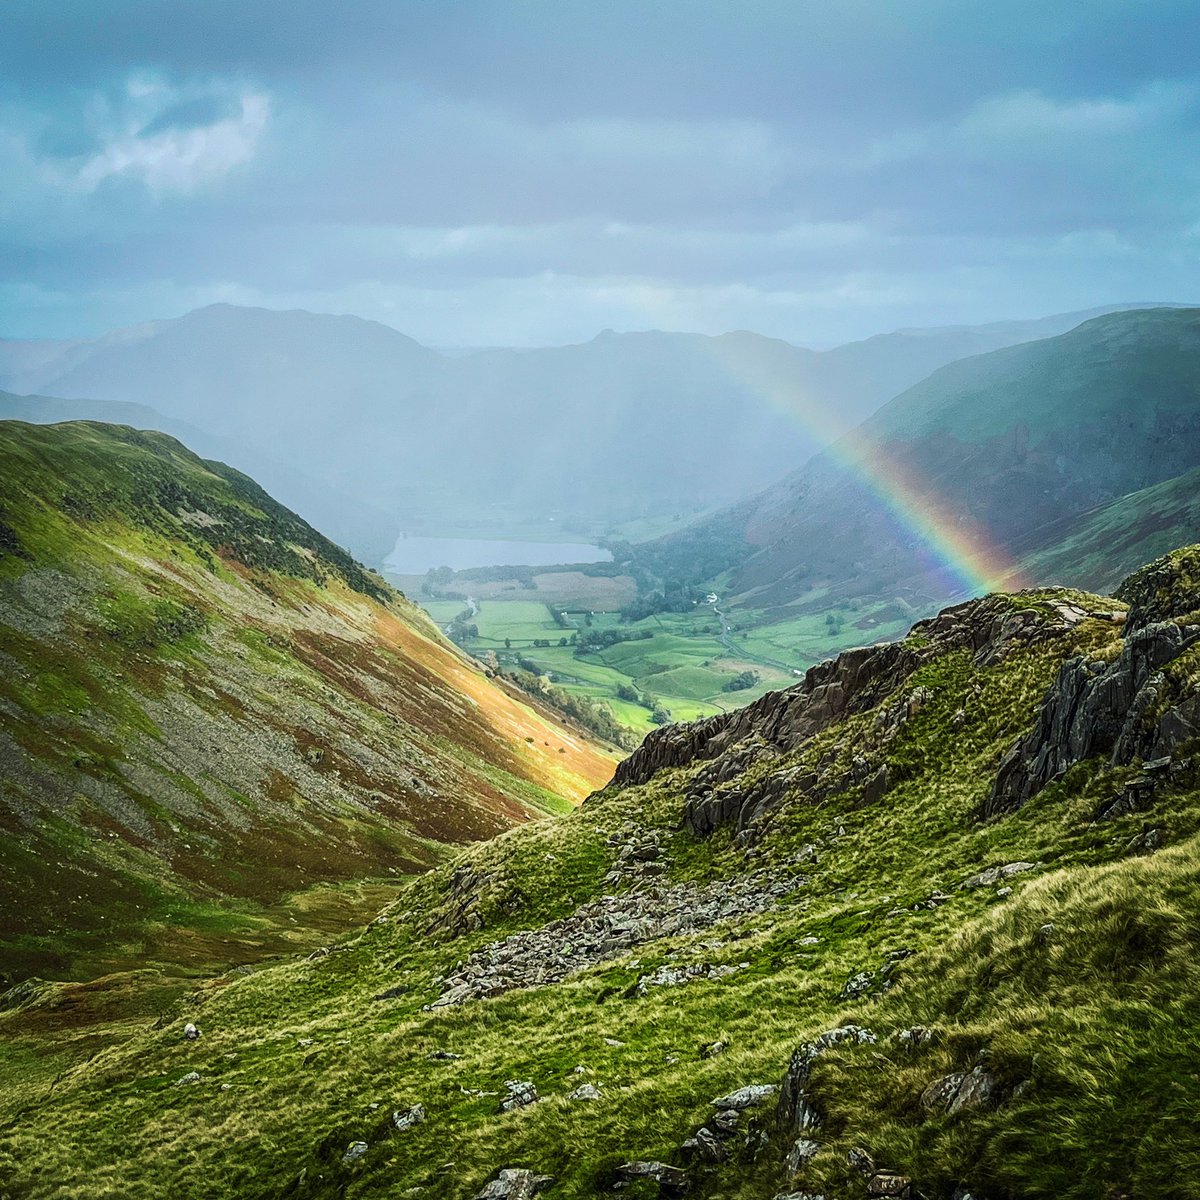 There be gold!!

Autumn blustery showers on Red Screes in the fabulous Lake District yielded this lovely rainbow 🌈 😍

@StormHour @bbcweather @rmets @NatGeoTravel @ThePhotoHour @BBCNEandCumbria @CumbriaLive @lakedistrictnpa @YourAmbleside